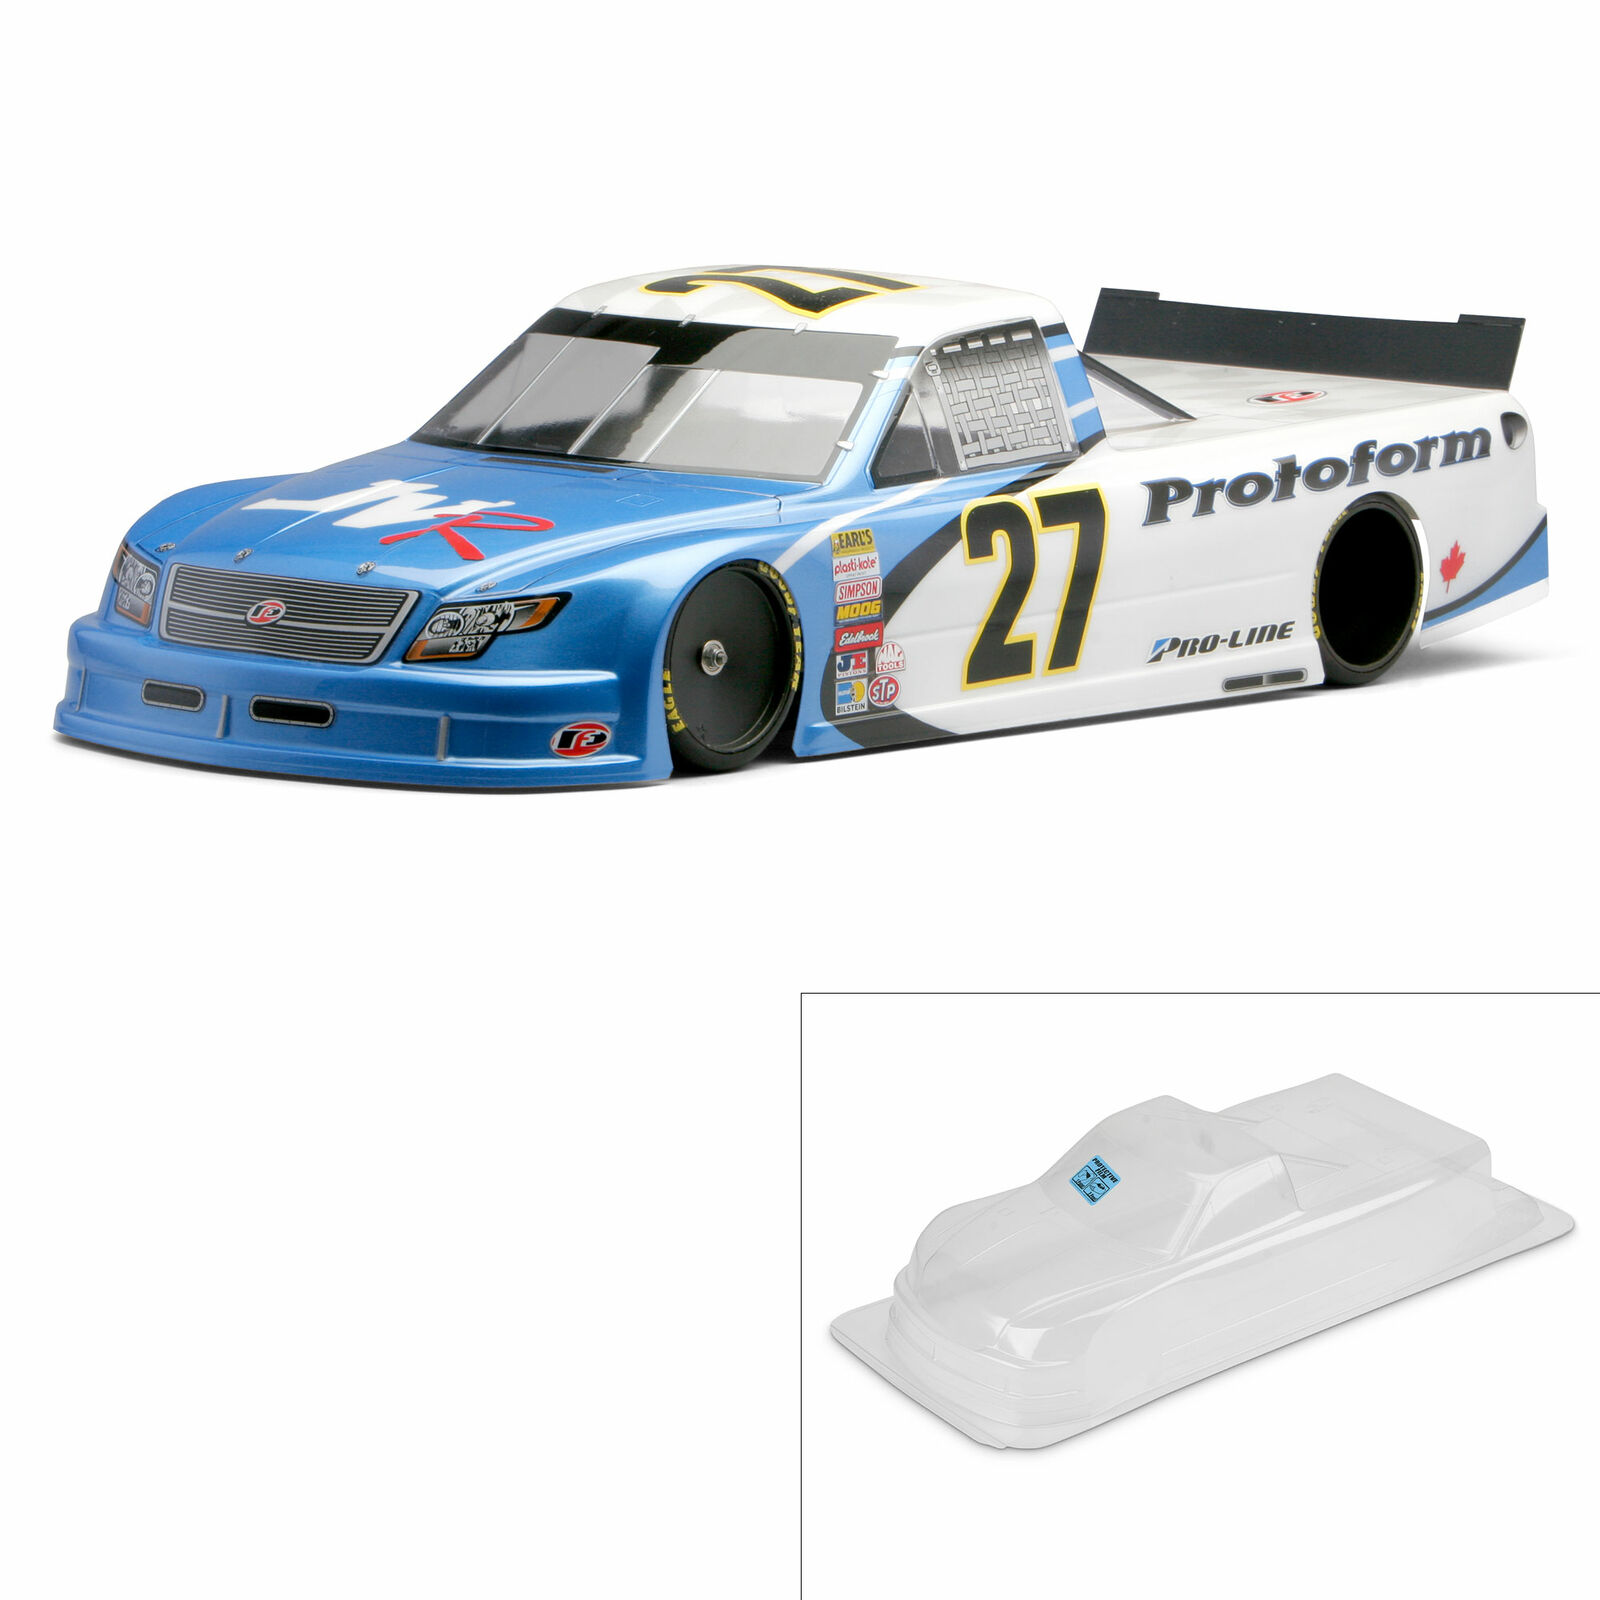 Protoform - Pro-line Racing ORT Oval Race Truck Body Clear PRM122721 Car/Truck